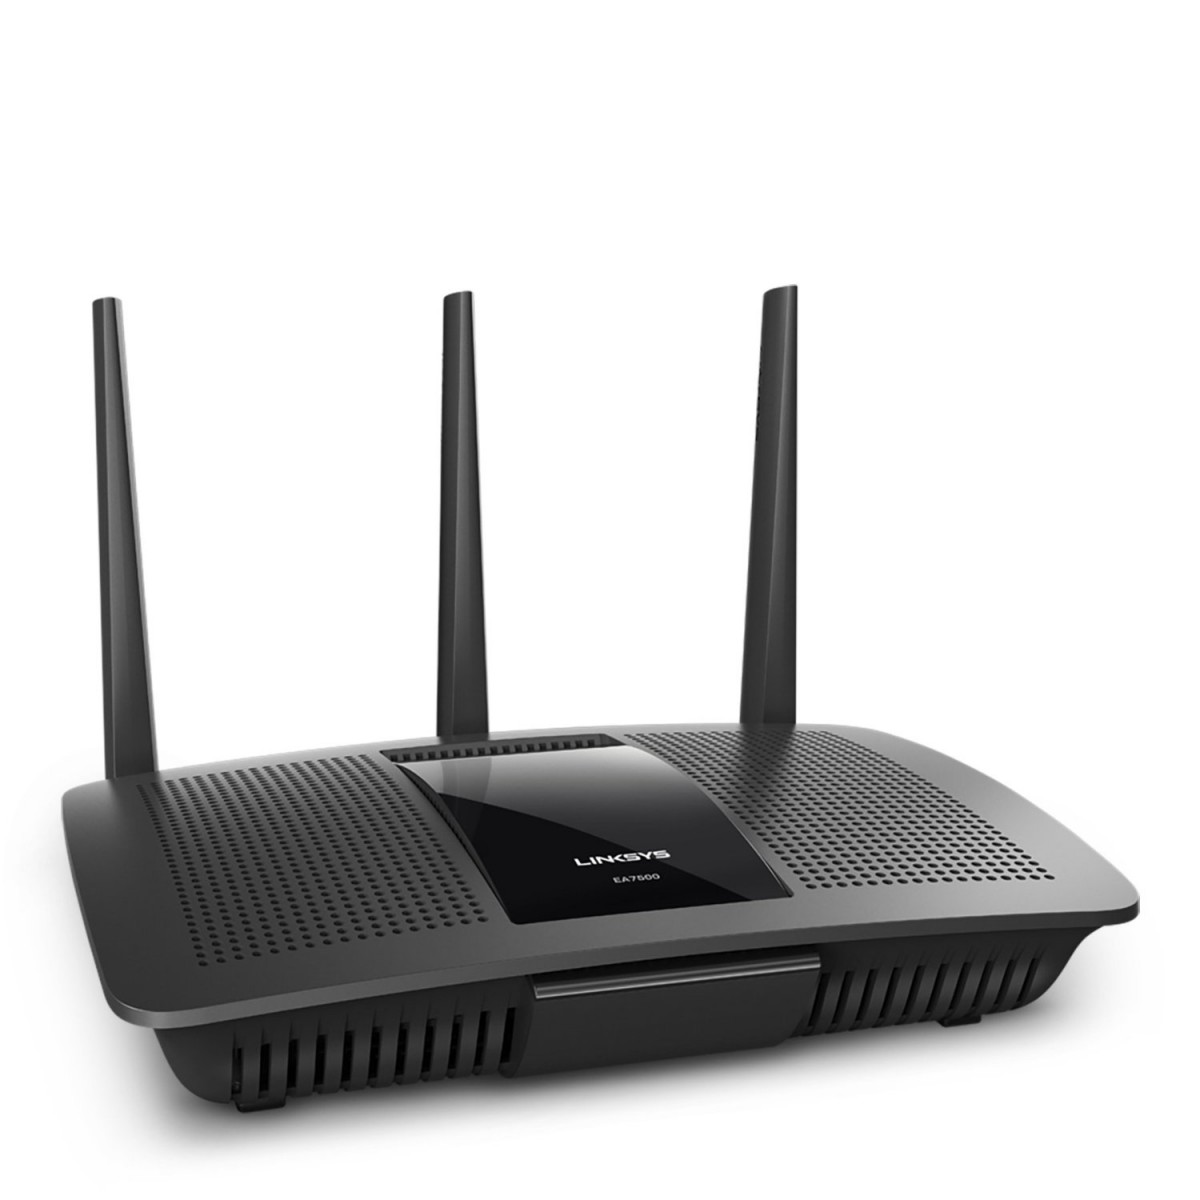 Linksys AC1900 (Max Stream EA7500) Review